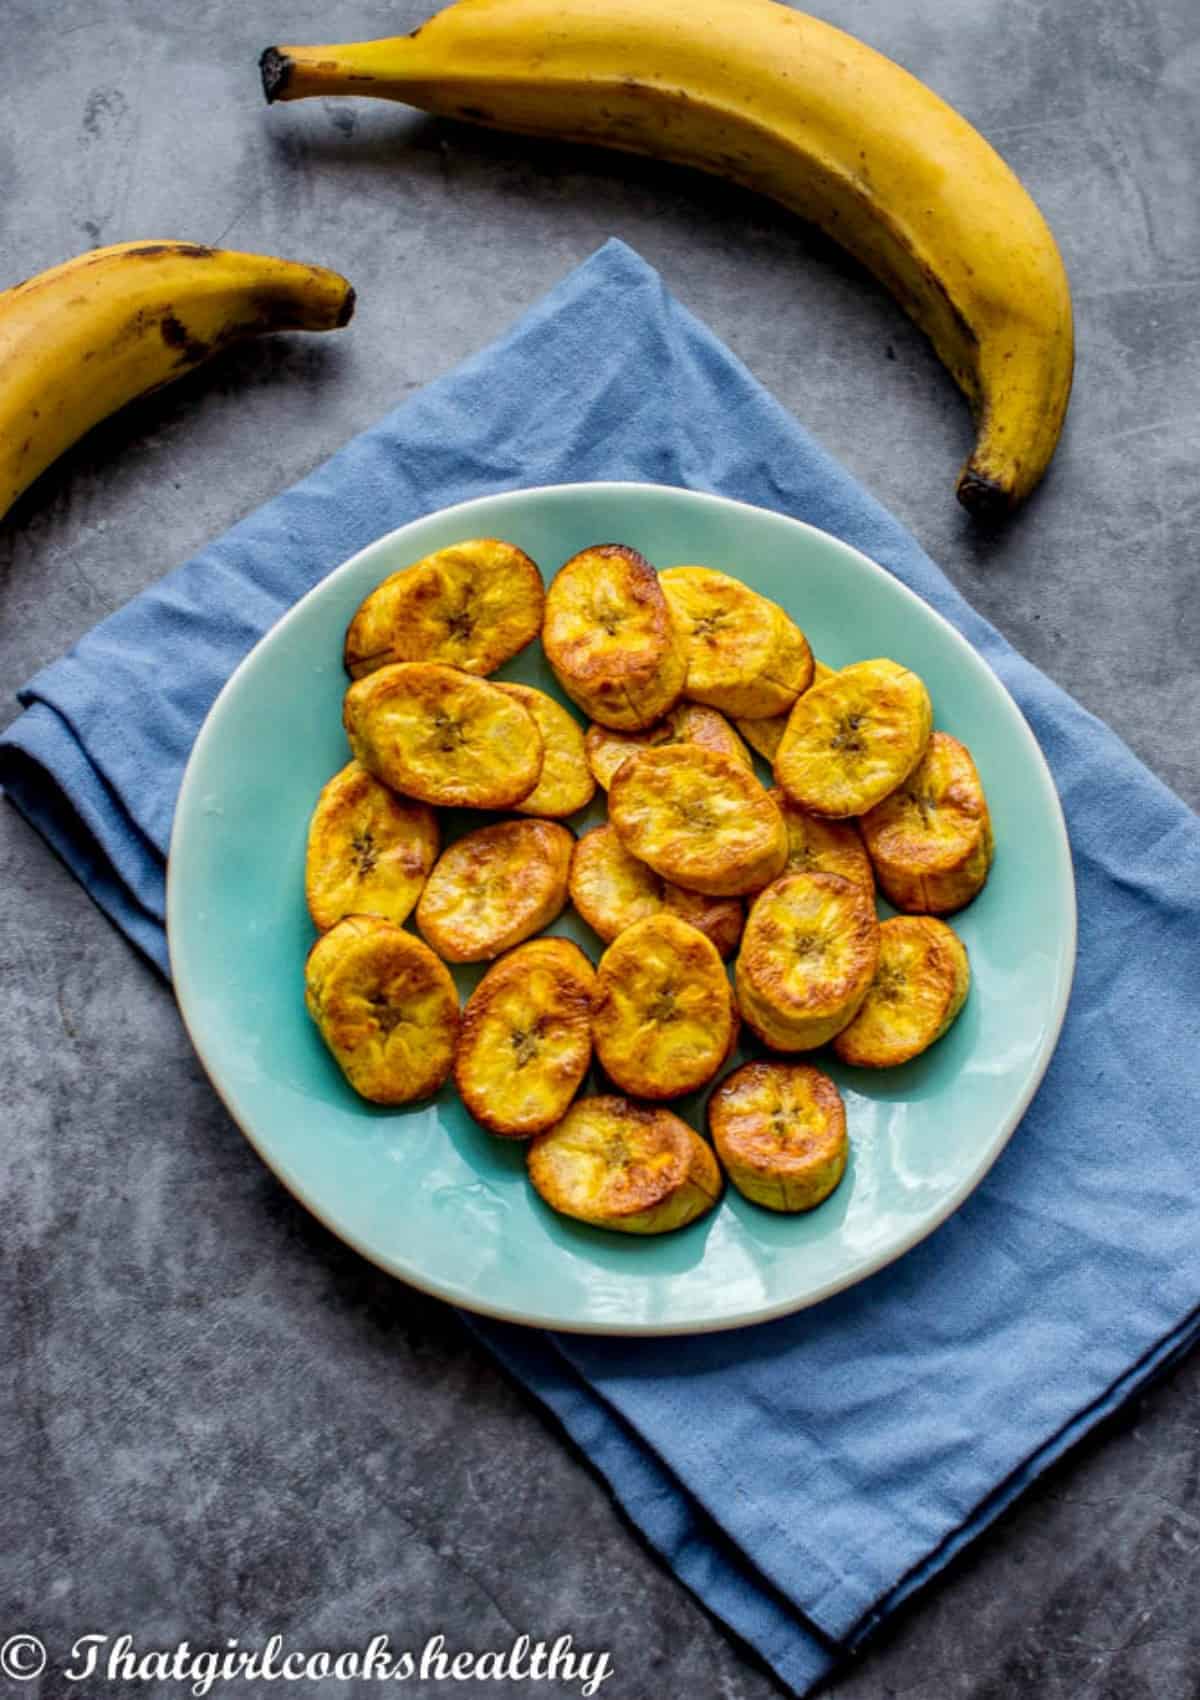 plantain slices on a plate with blue clo